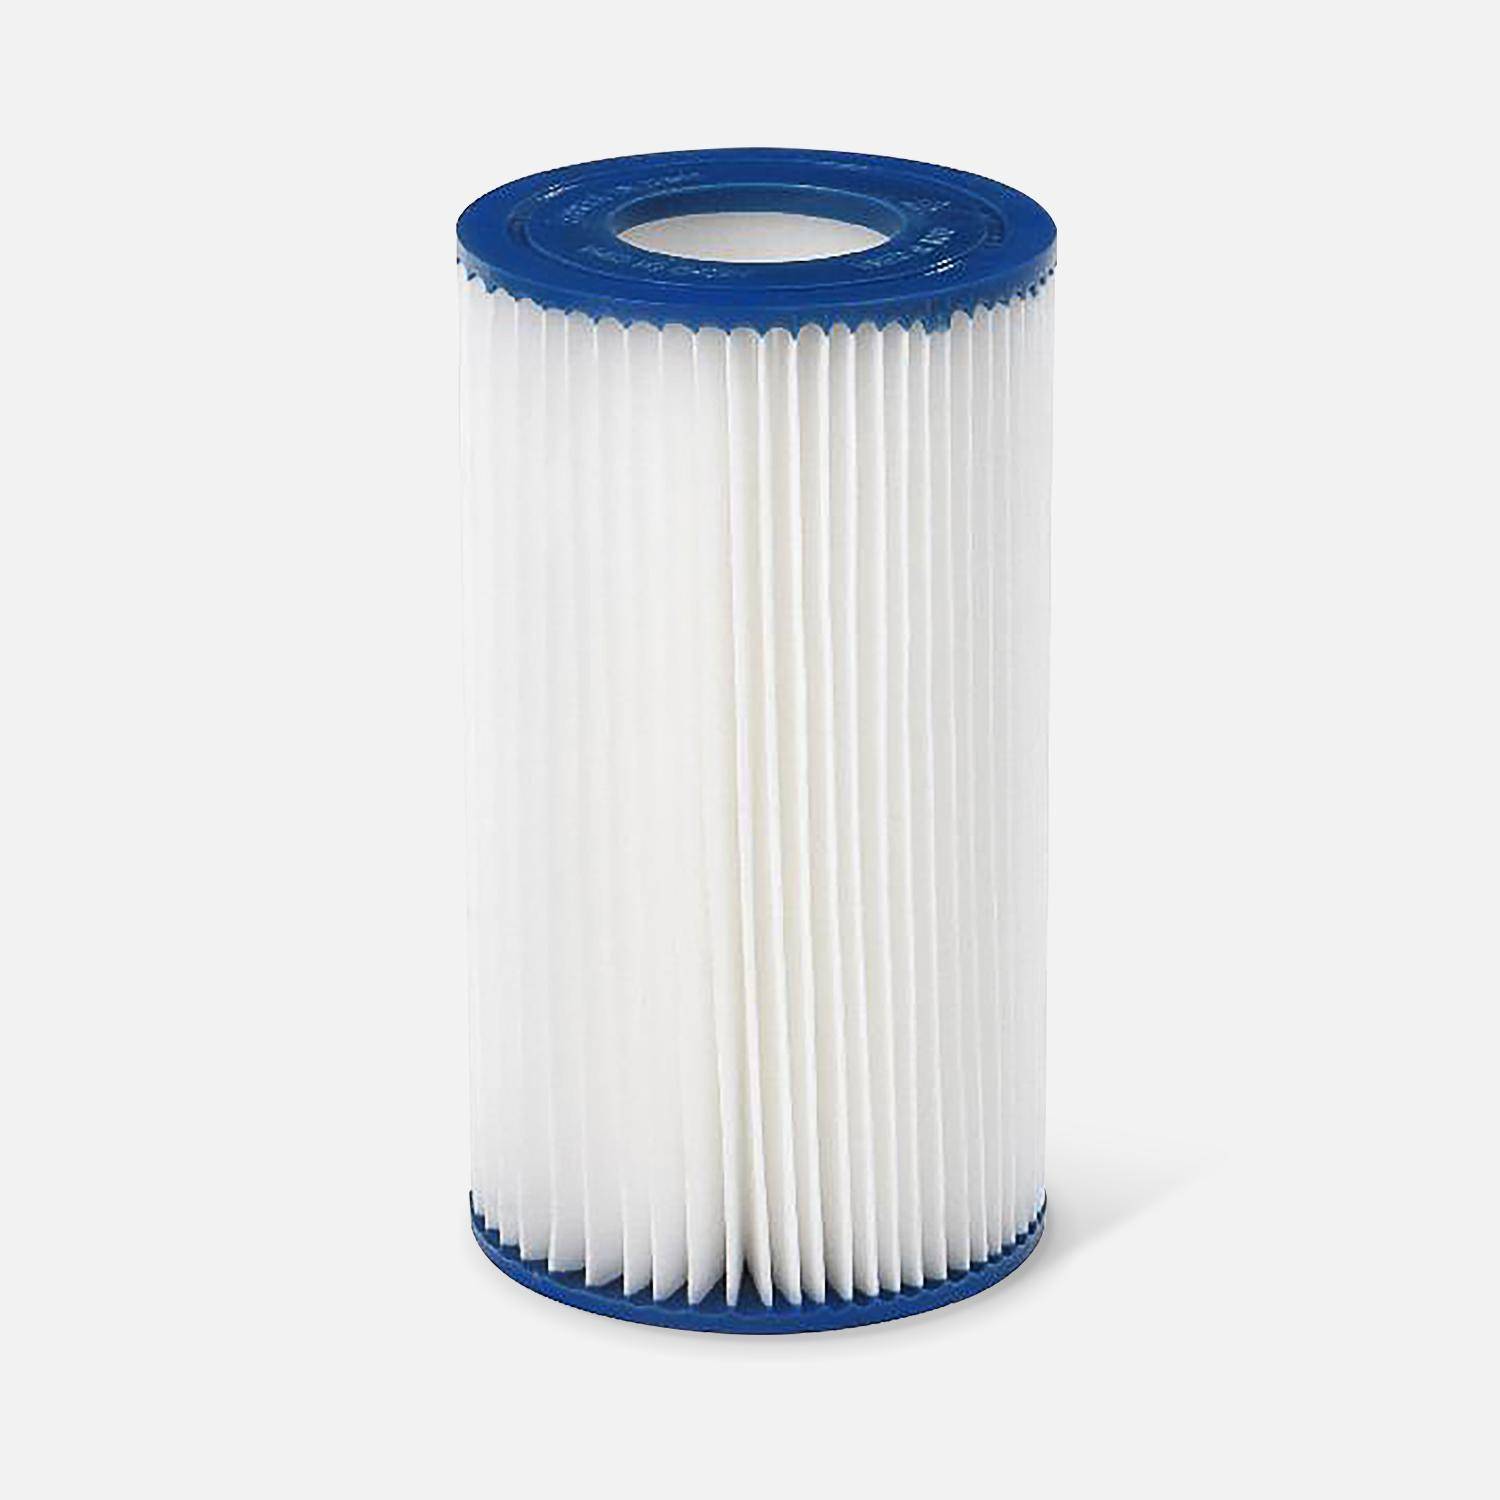 Type 3 filter cartridge for pool pump - Ø106 x H203mm compatible with 3785L/h filters. Photo1